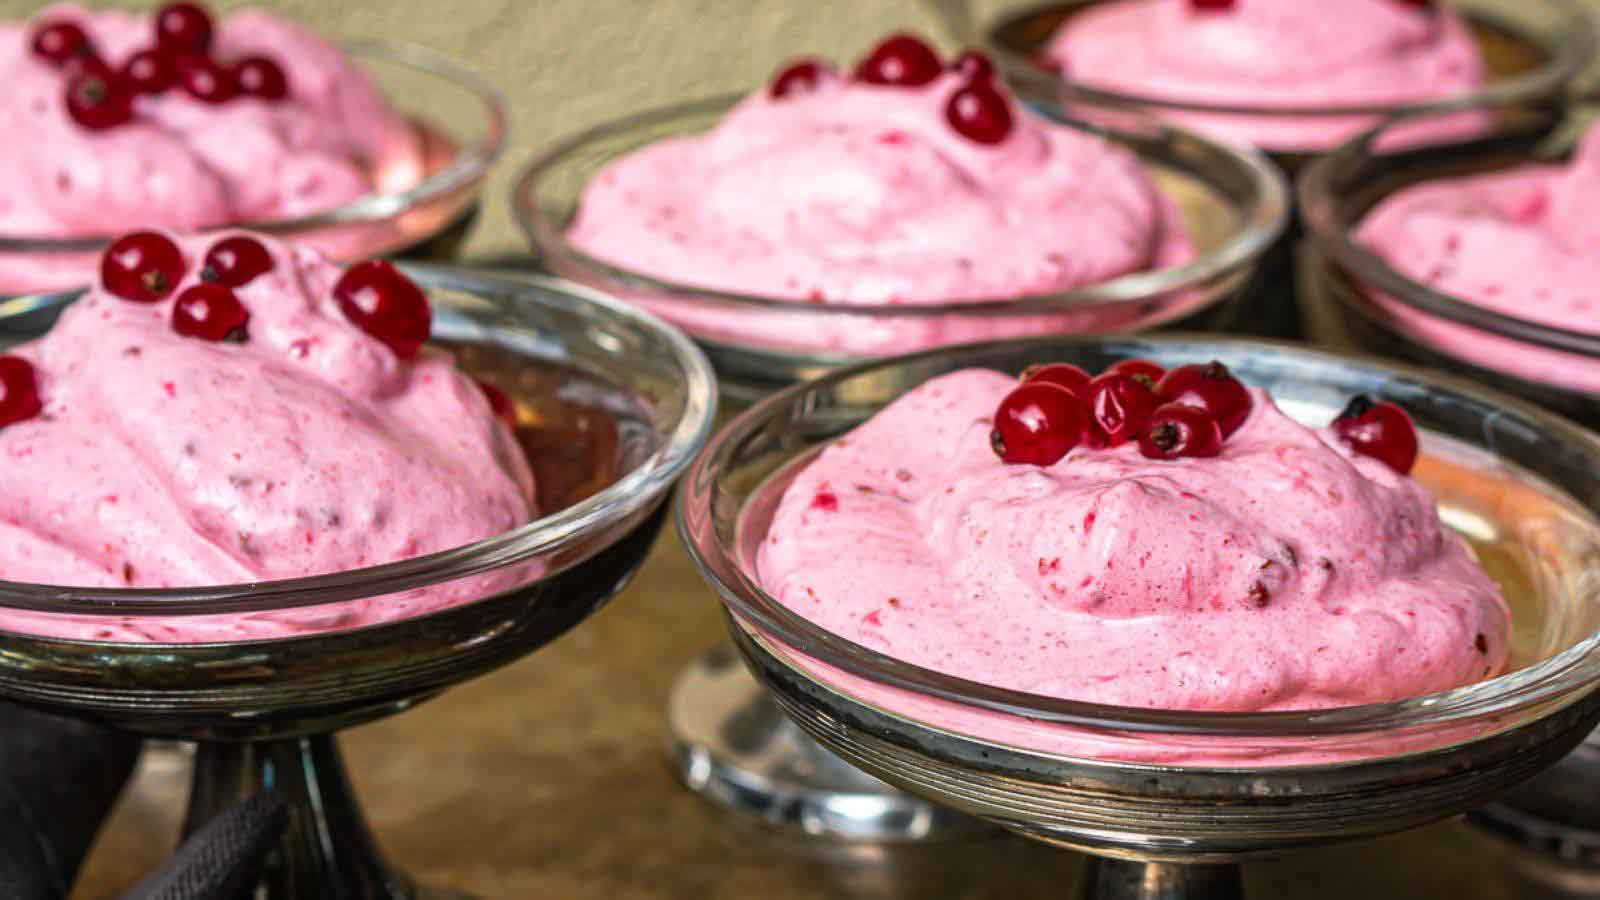 Red Currant Fluff inside glass serving bowls. 